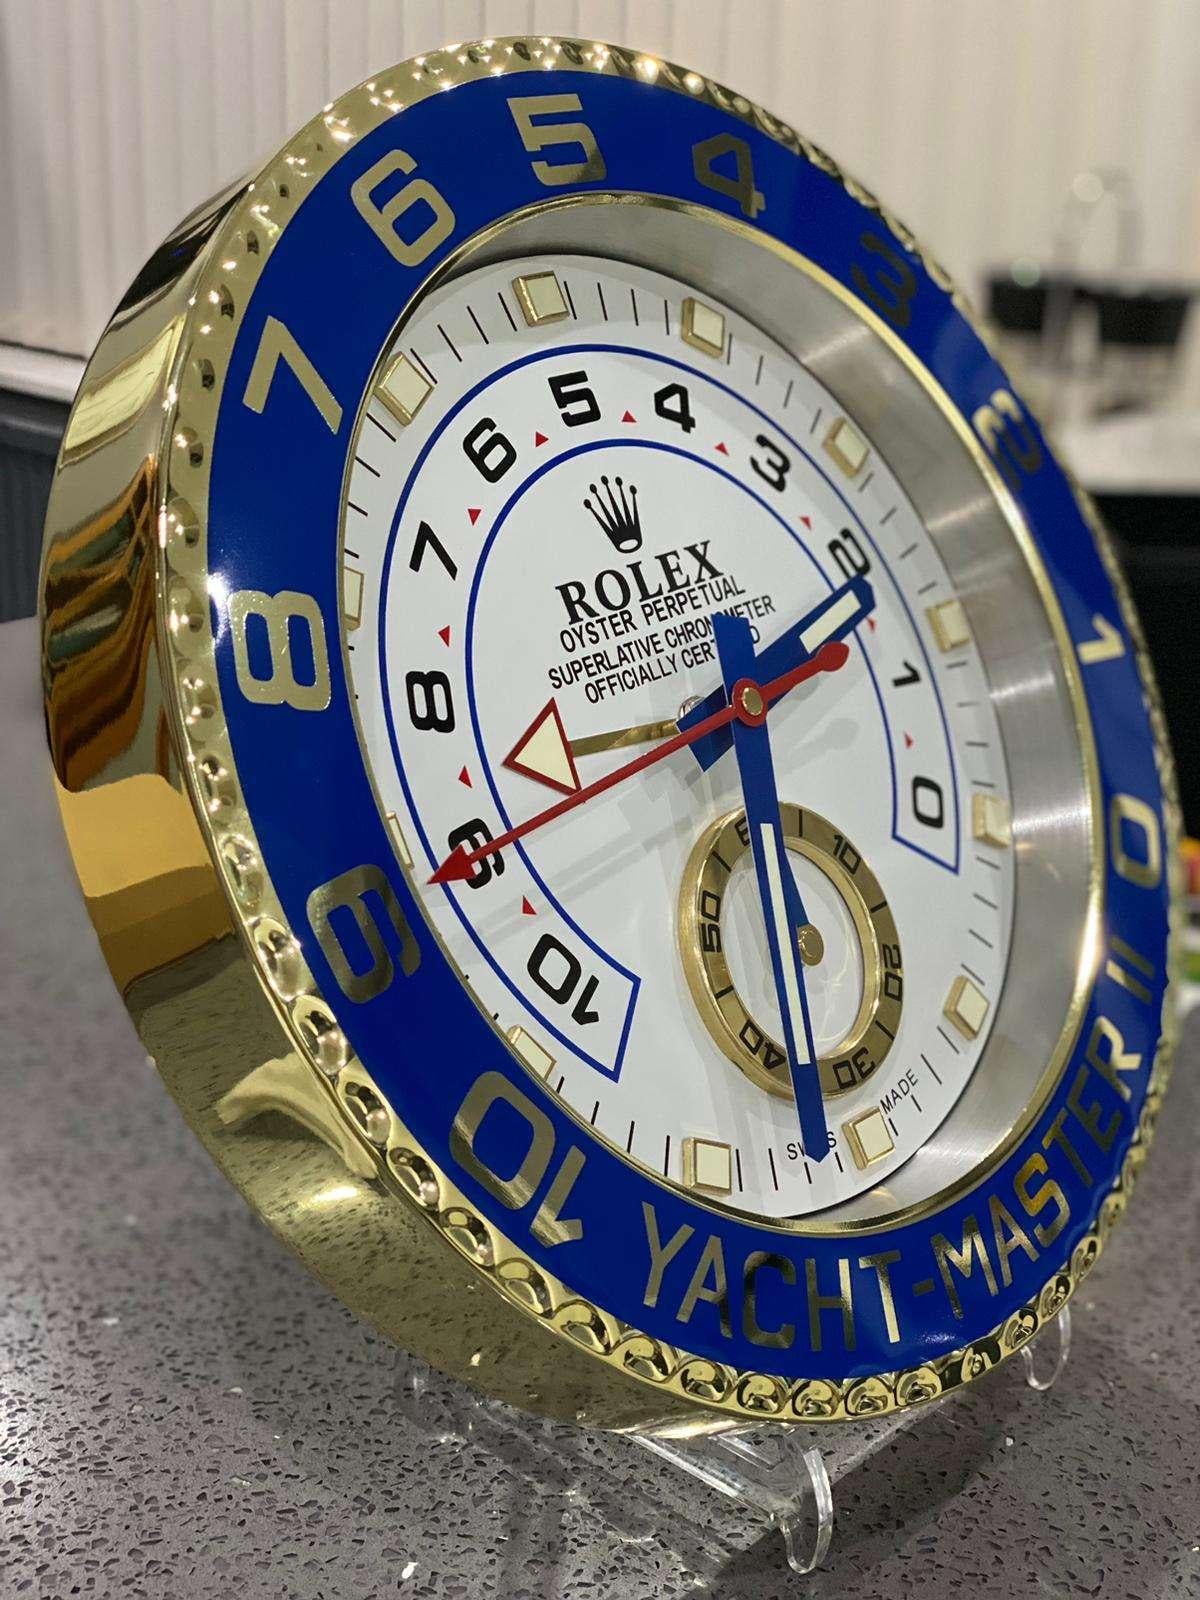 ROLEX Officially Certified Chrome Gold and Blue Yacht Master II Wall Clock
Good condition, working.
Lume strips Sweeping Quartz movement powered by single AA Battery.
Clock dimensions measure approximately 35cm by 5cm thickness

These wall clocks